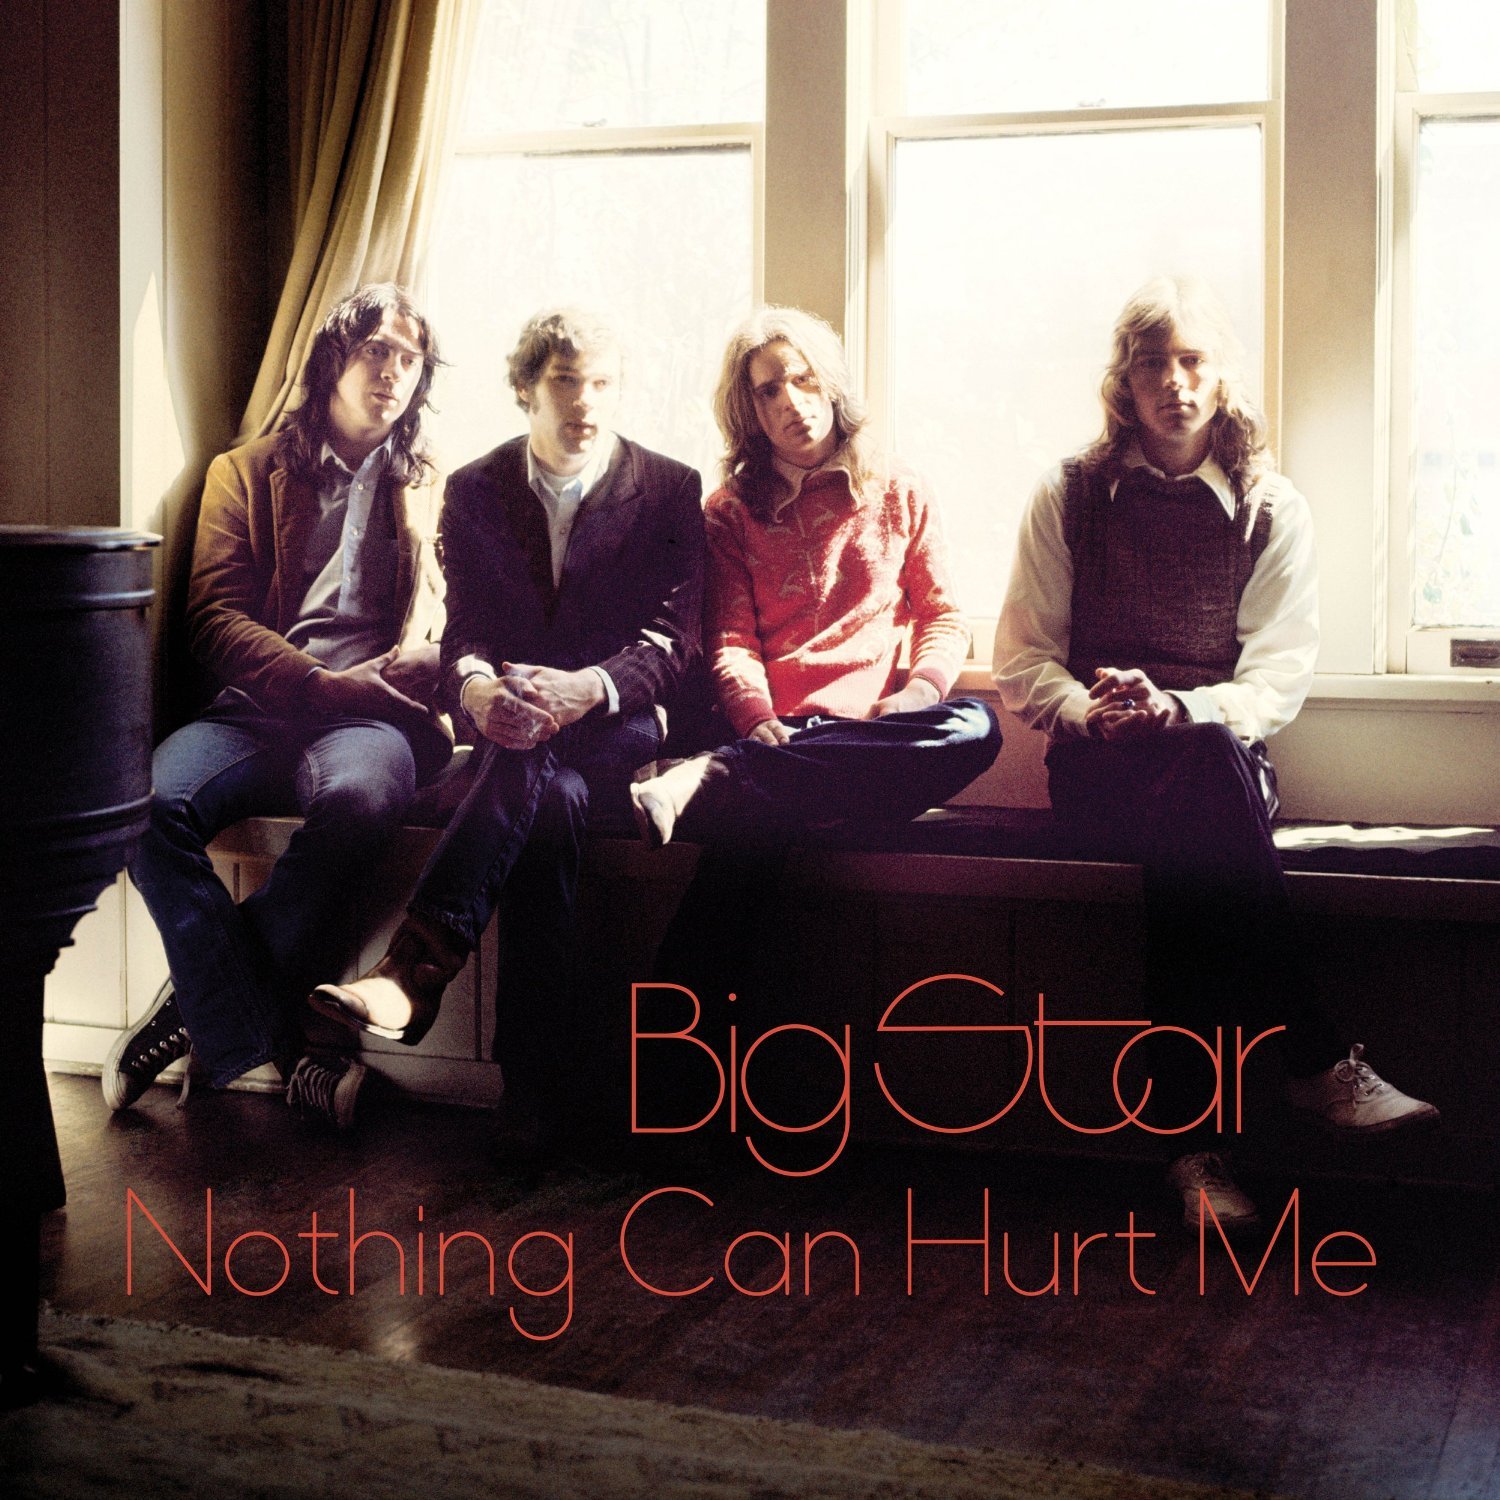 big-star-nothing-can-hurt-me-cover